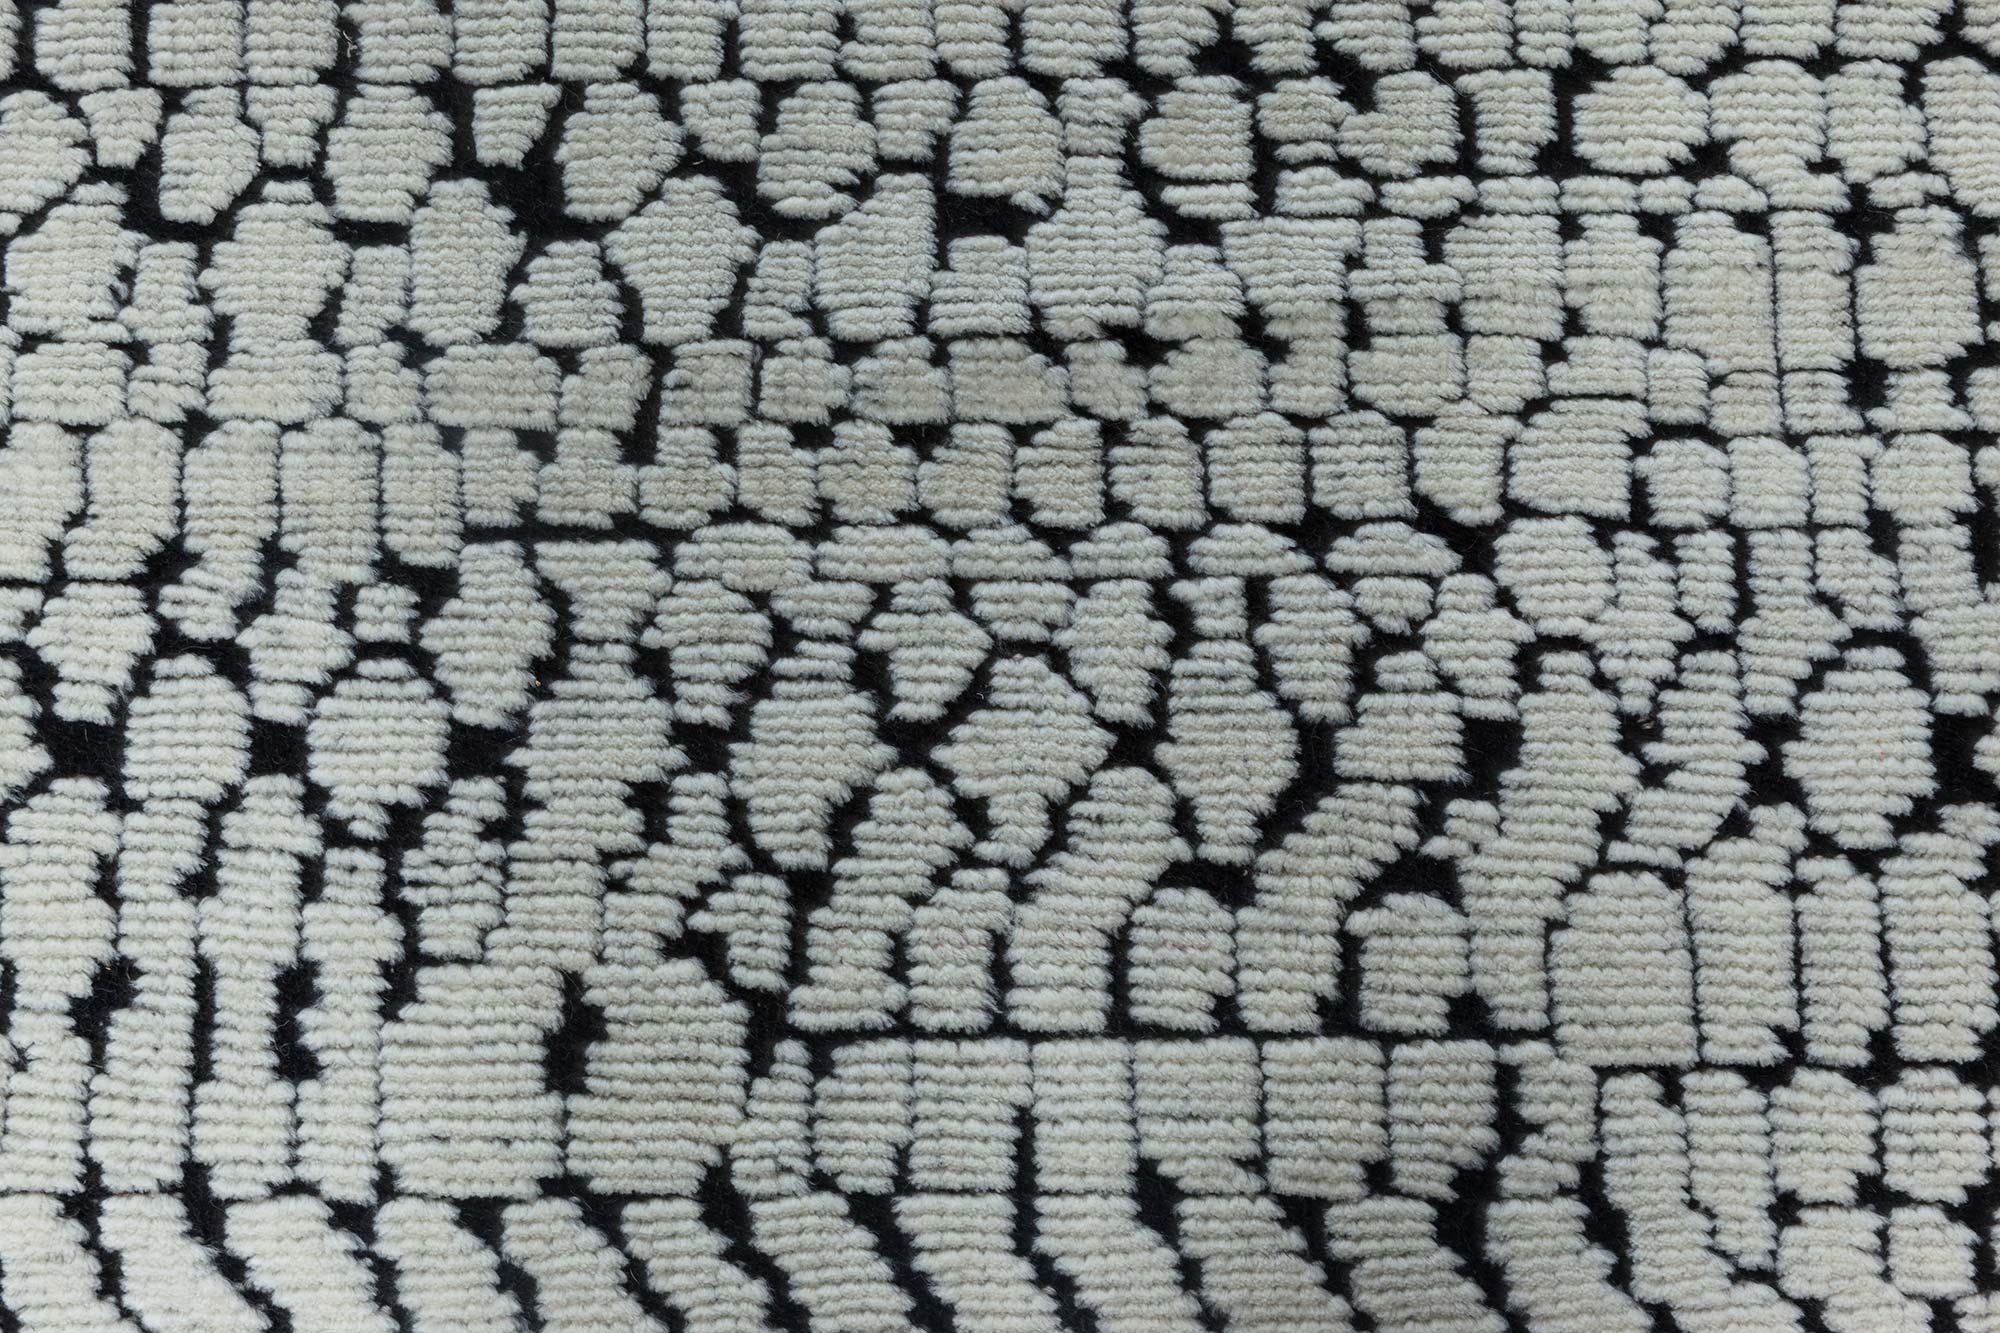 Indian Contemporary 'Society' Black and White Handmade Wool Rug by Doris Leslie Blau For Sale